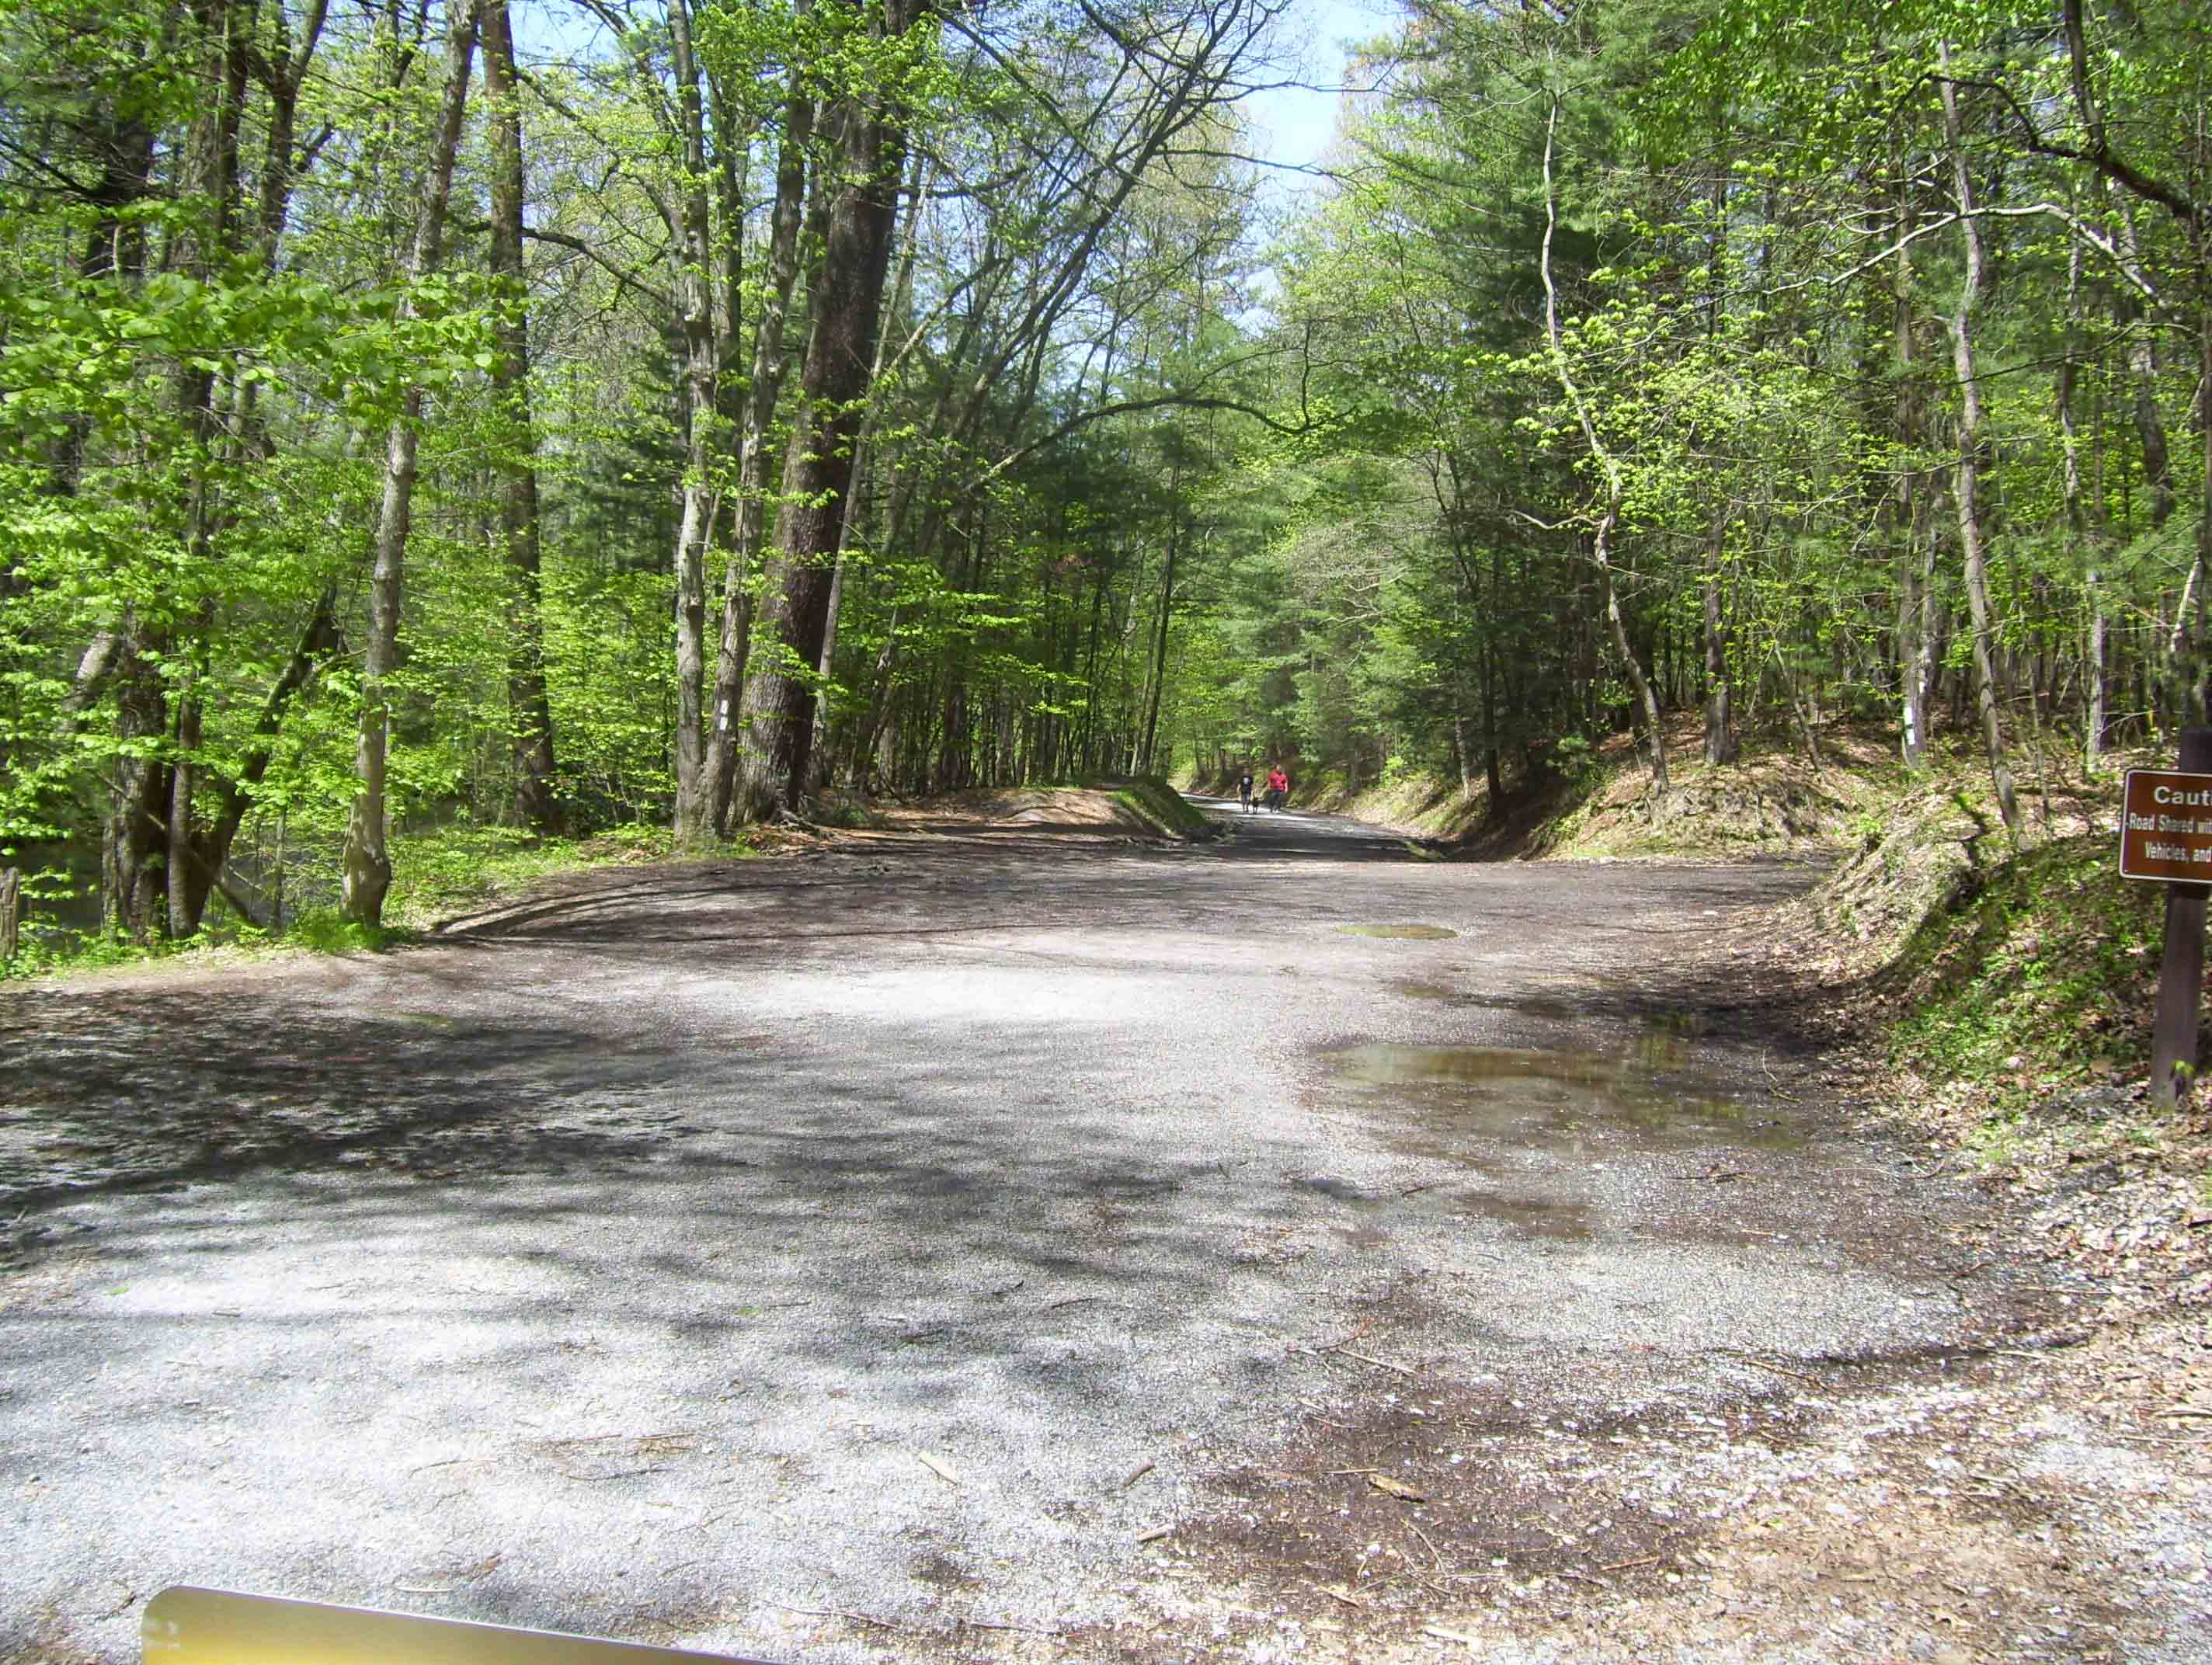 MM 9.5.  This is the parking area at the end of the portion of the old railroad bed road that is accessible to vehicles. The northbound AT follow the old road that leaves to the right.   Courtesy dlcul@conncoll.edu